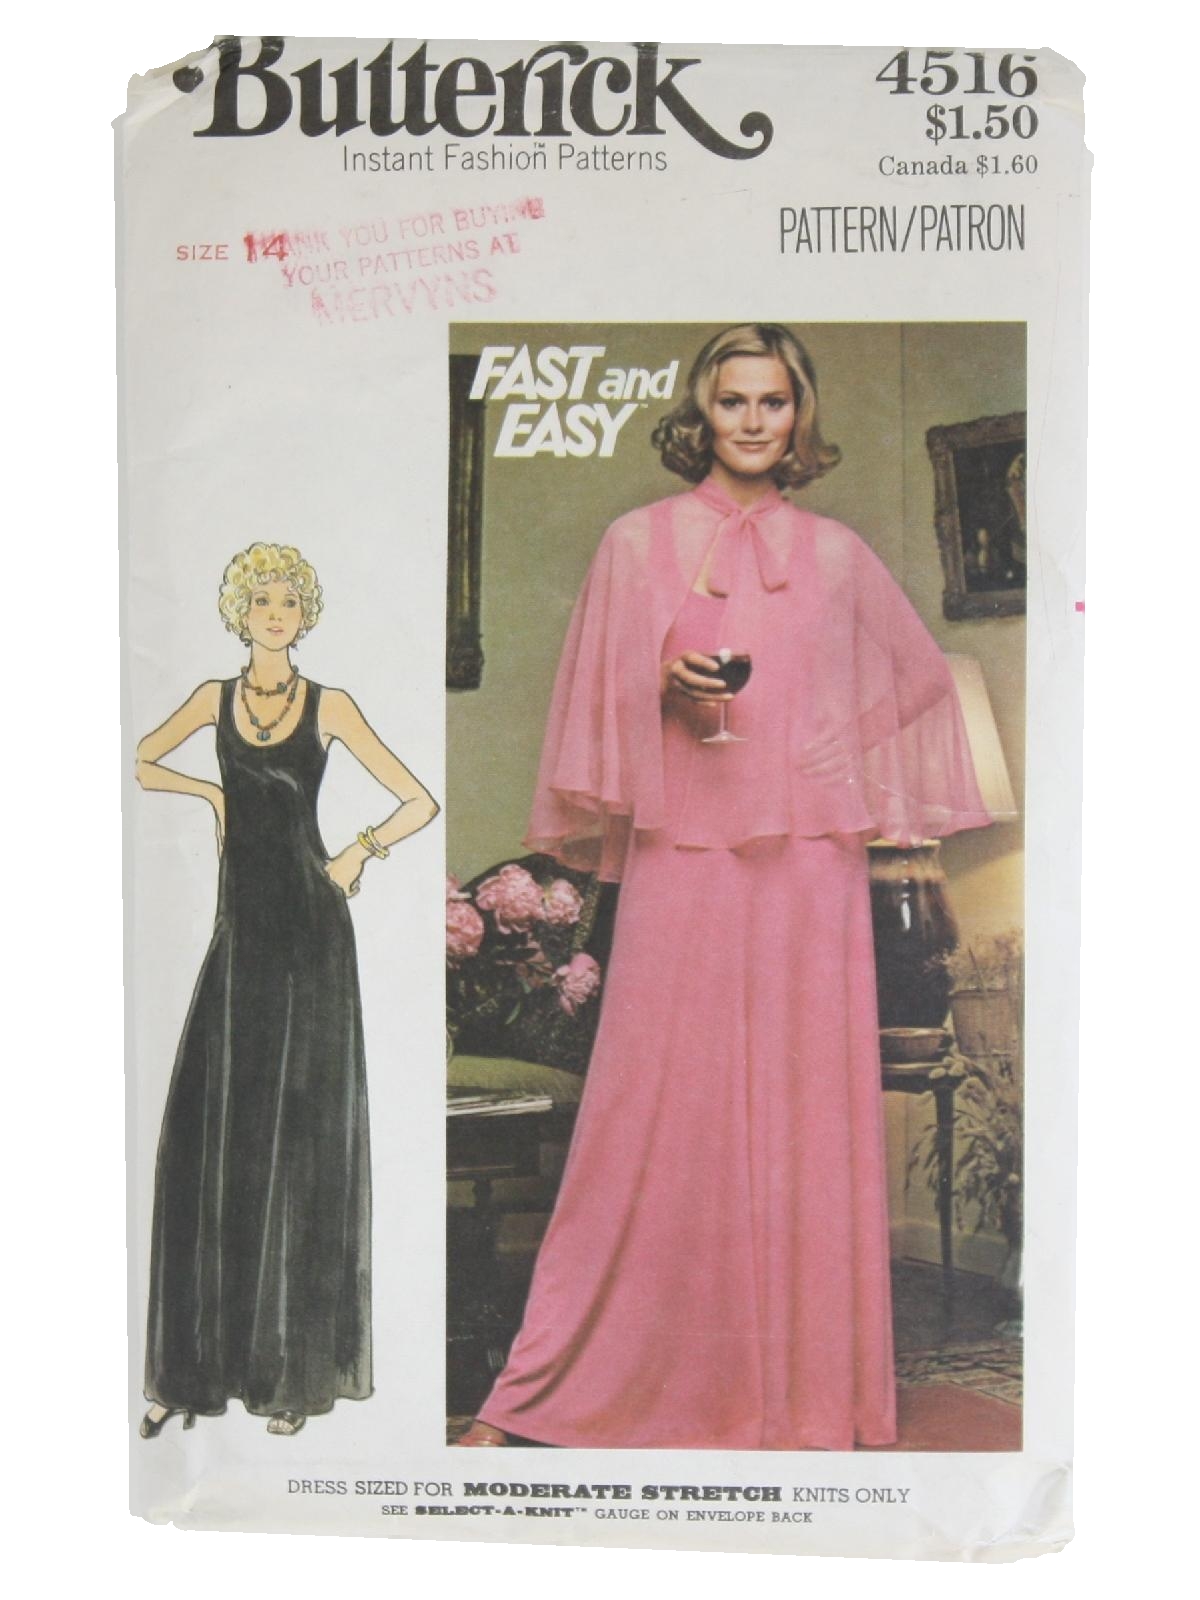 Retro 70's Sewing Pattern: 70s -Butterick Pattern No. 4516- Womens evening  dress and cape. The close fitting, slightly flared dress has deep U  neckline, cutaway armholes, T back, and topstitch trim. The